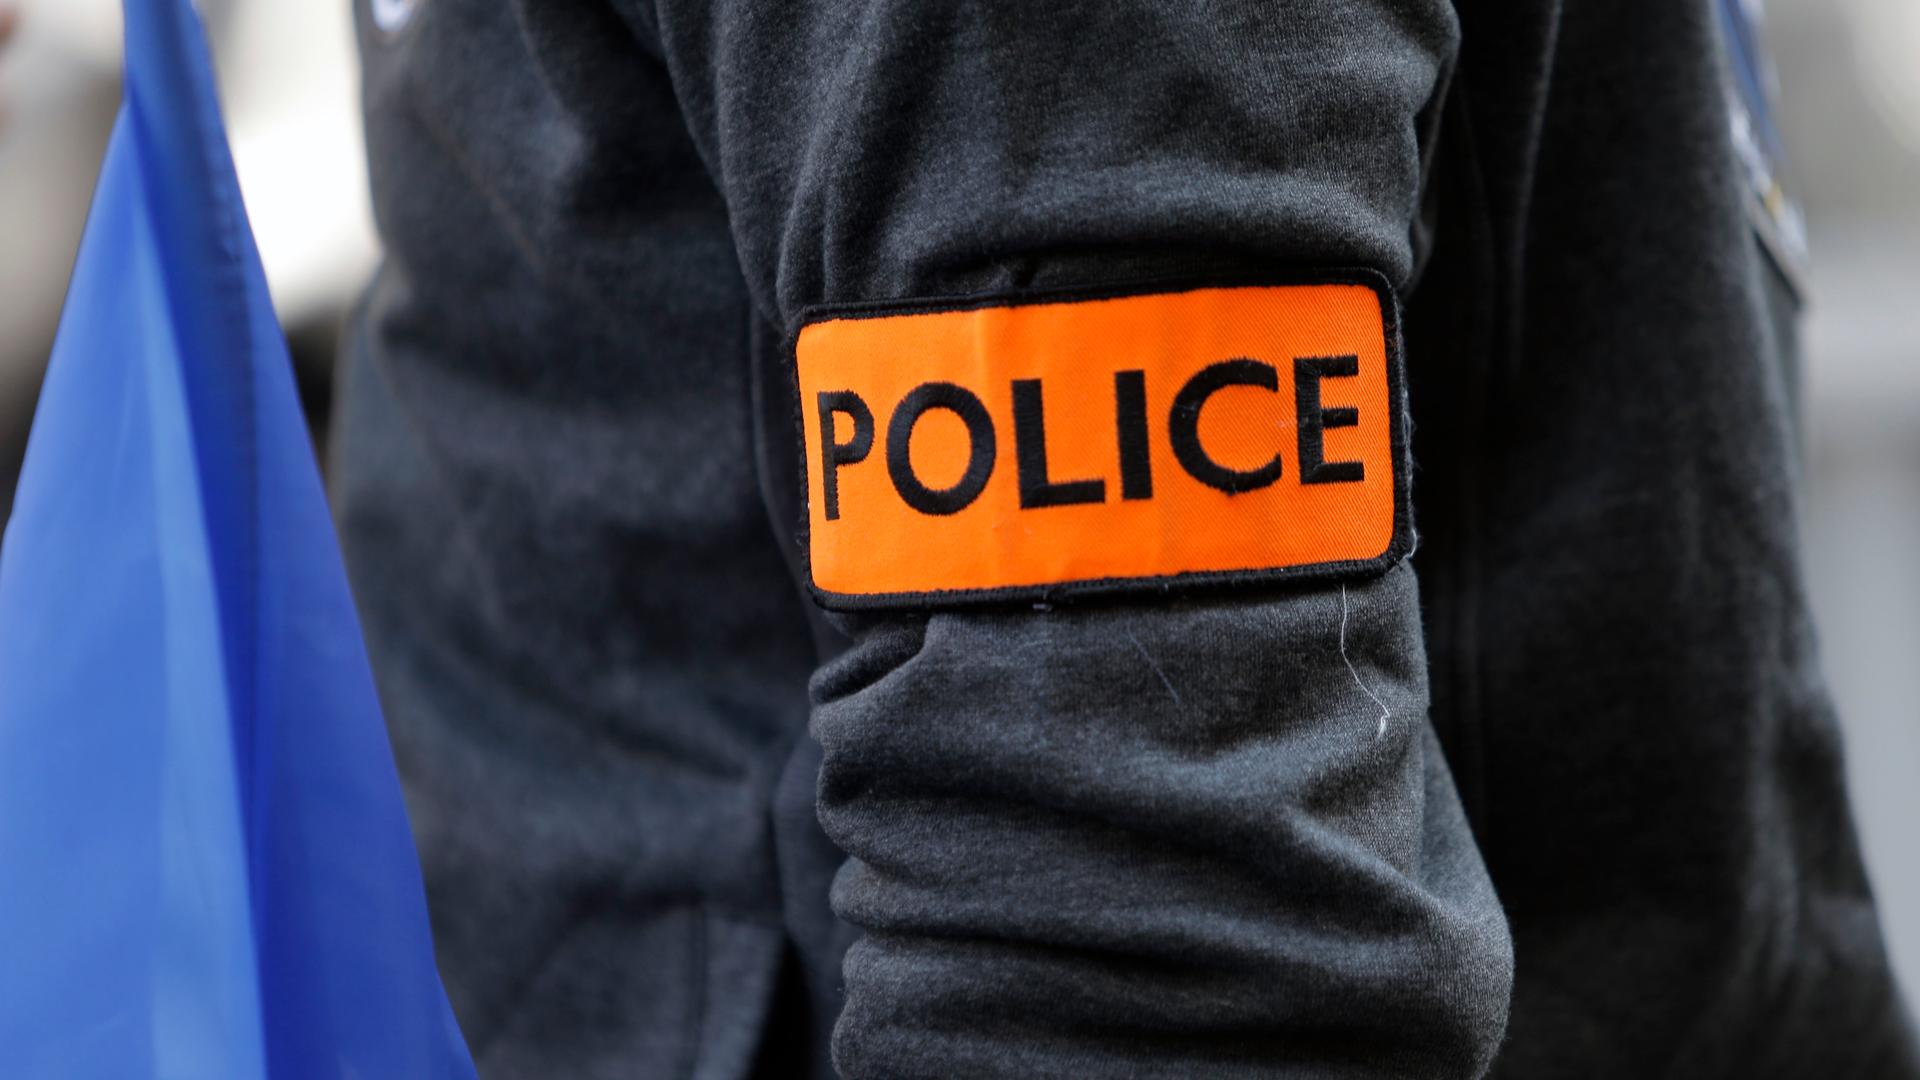 An arm with an orange band with black letters spelling out "Police" 